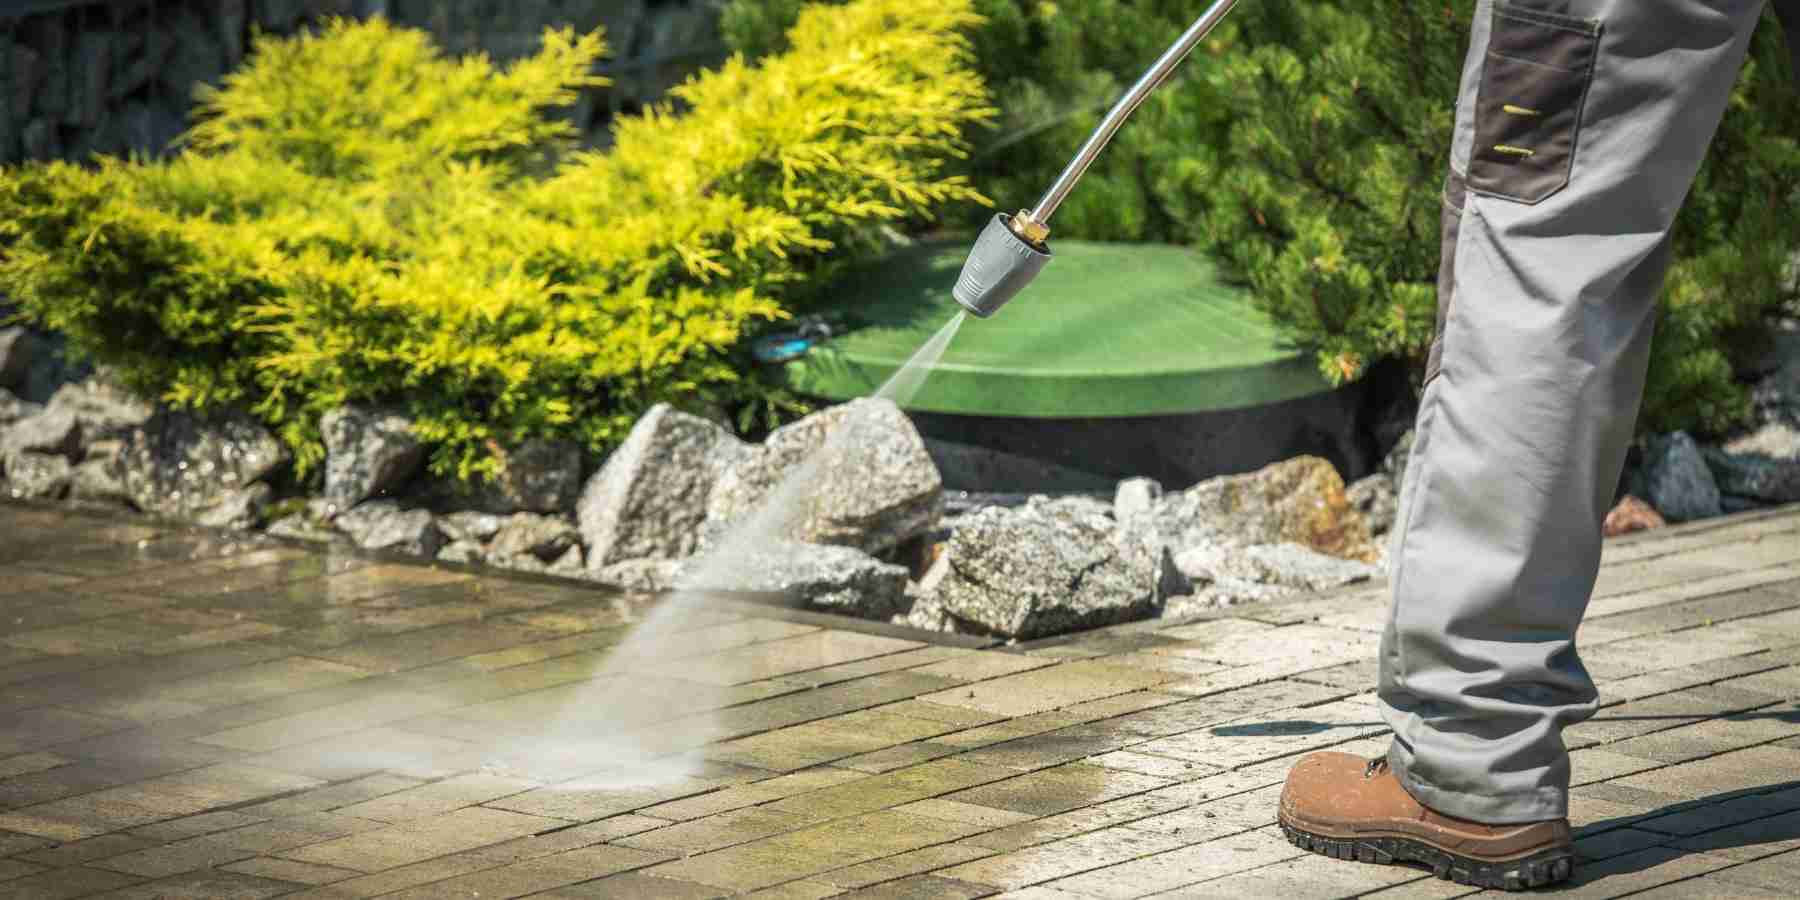 How to Start a Pressure Washing Business (Ultimate 2022 Guide)